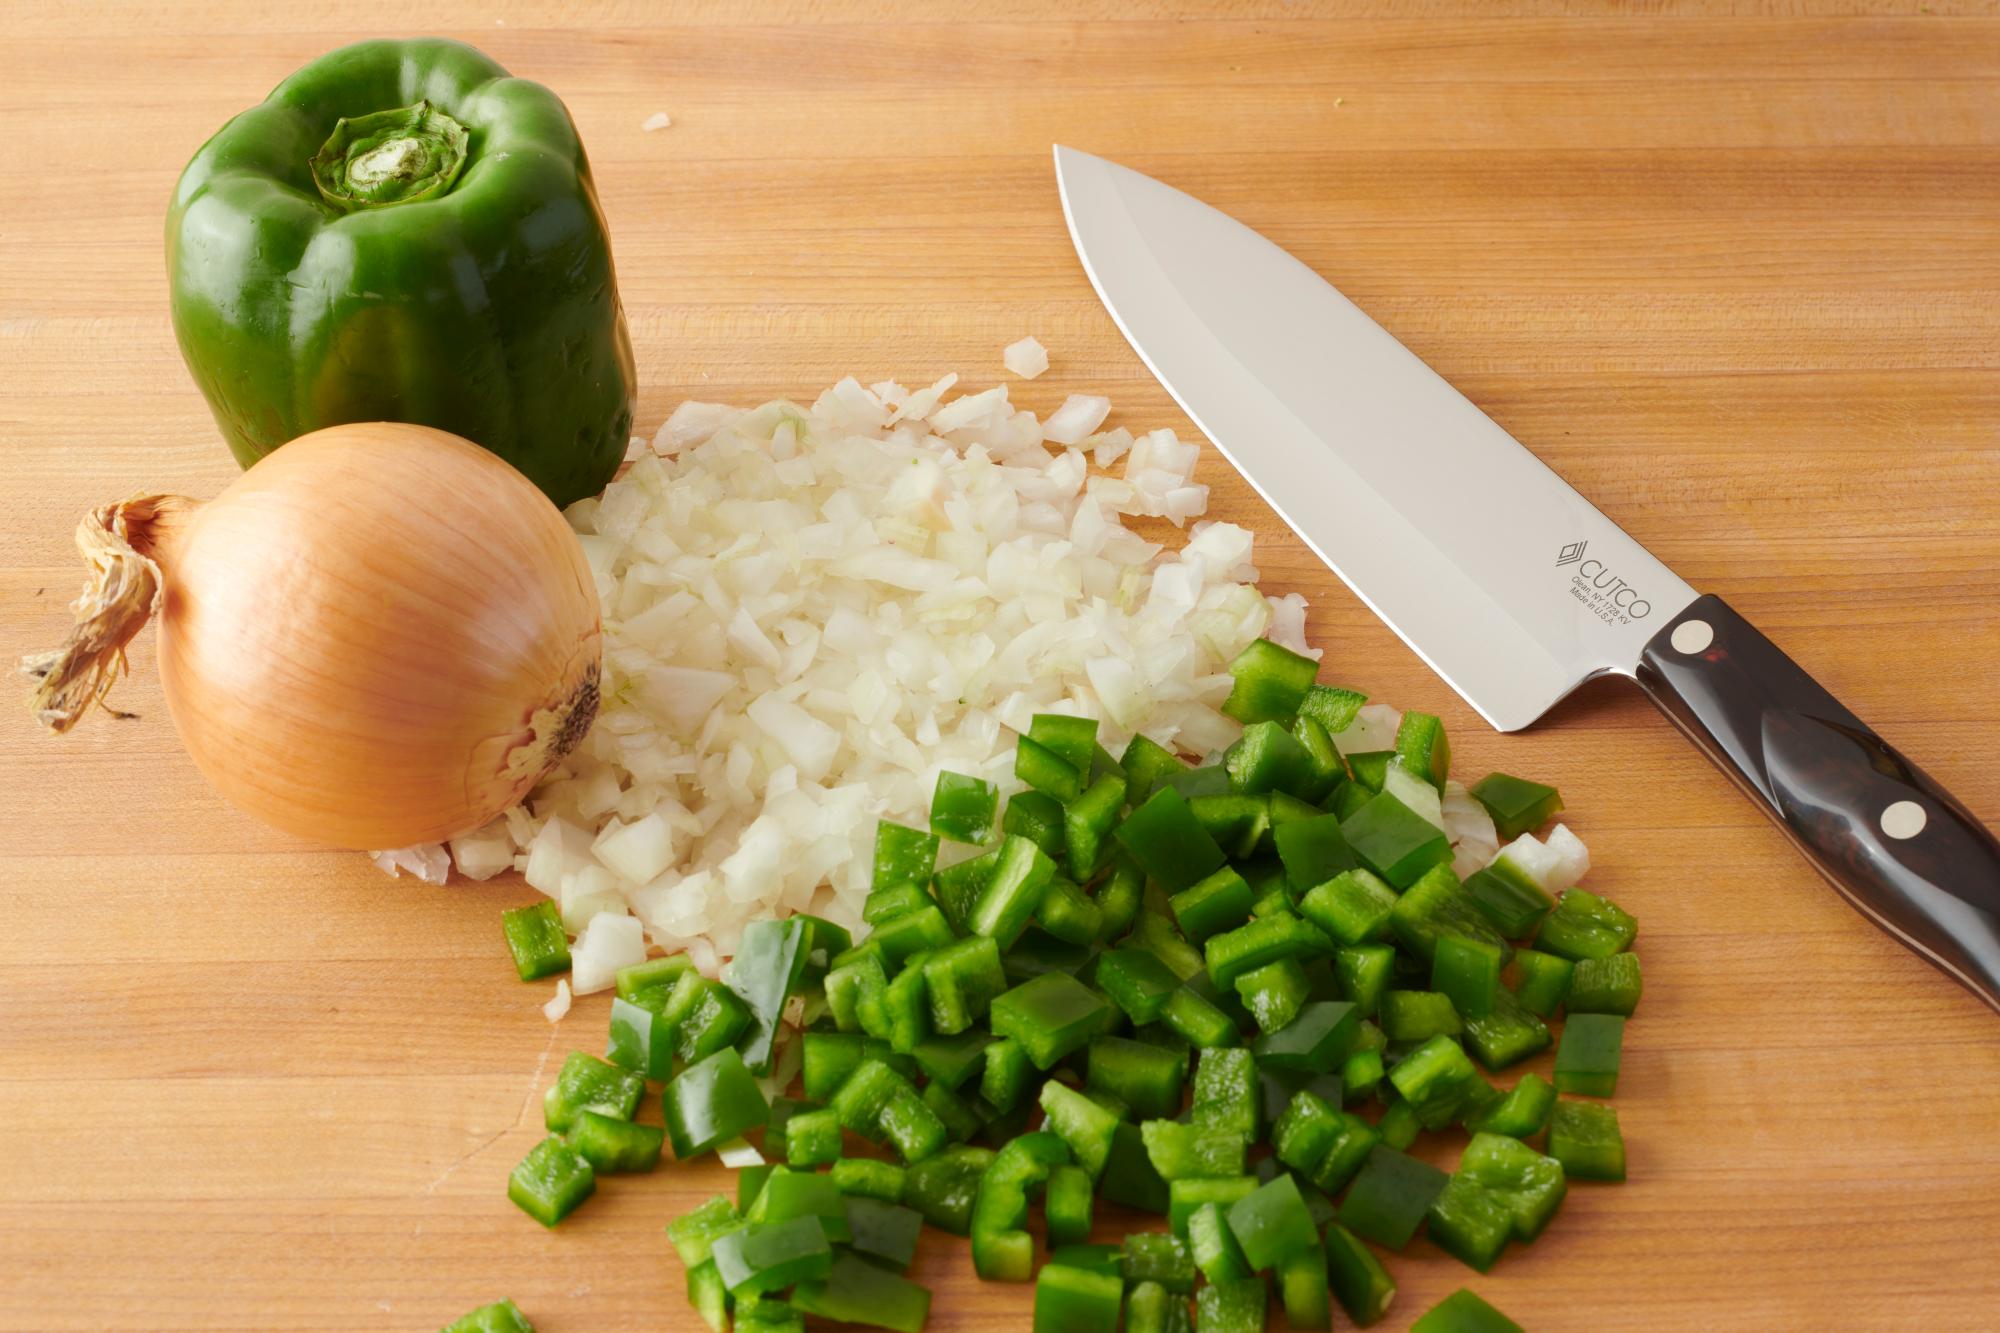 Using the Petite Chef to dice the onion and green pepper.